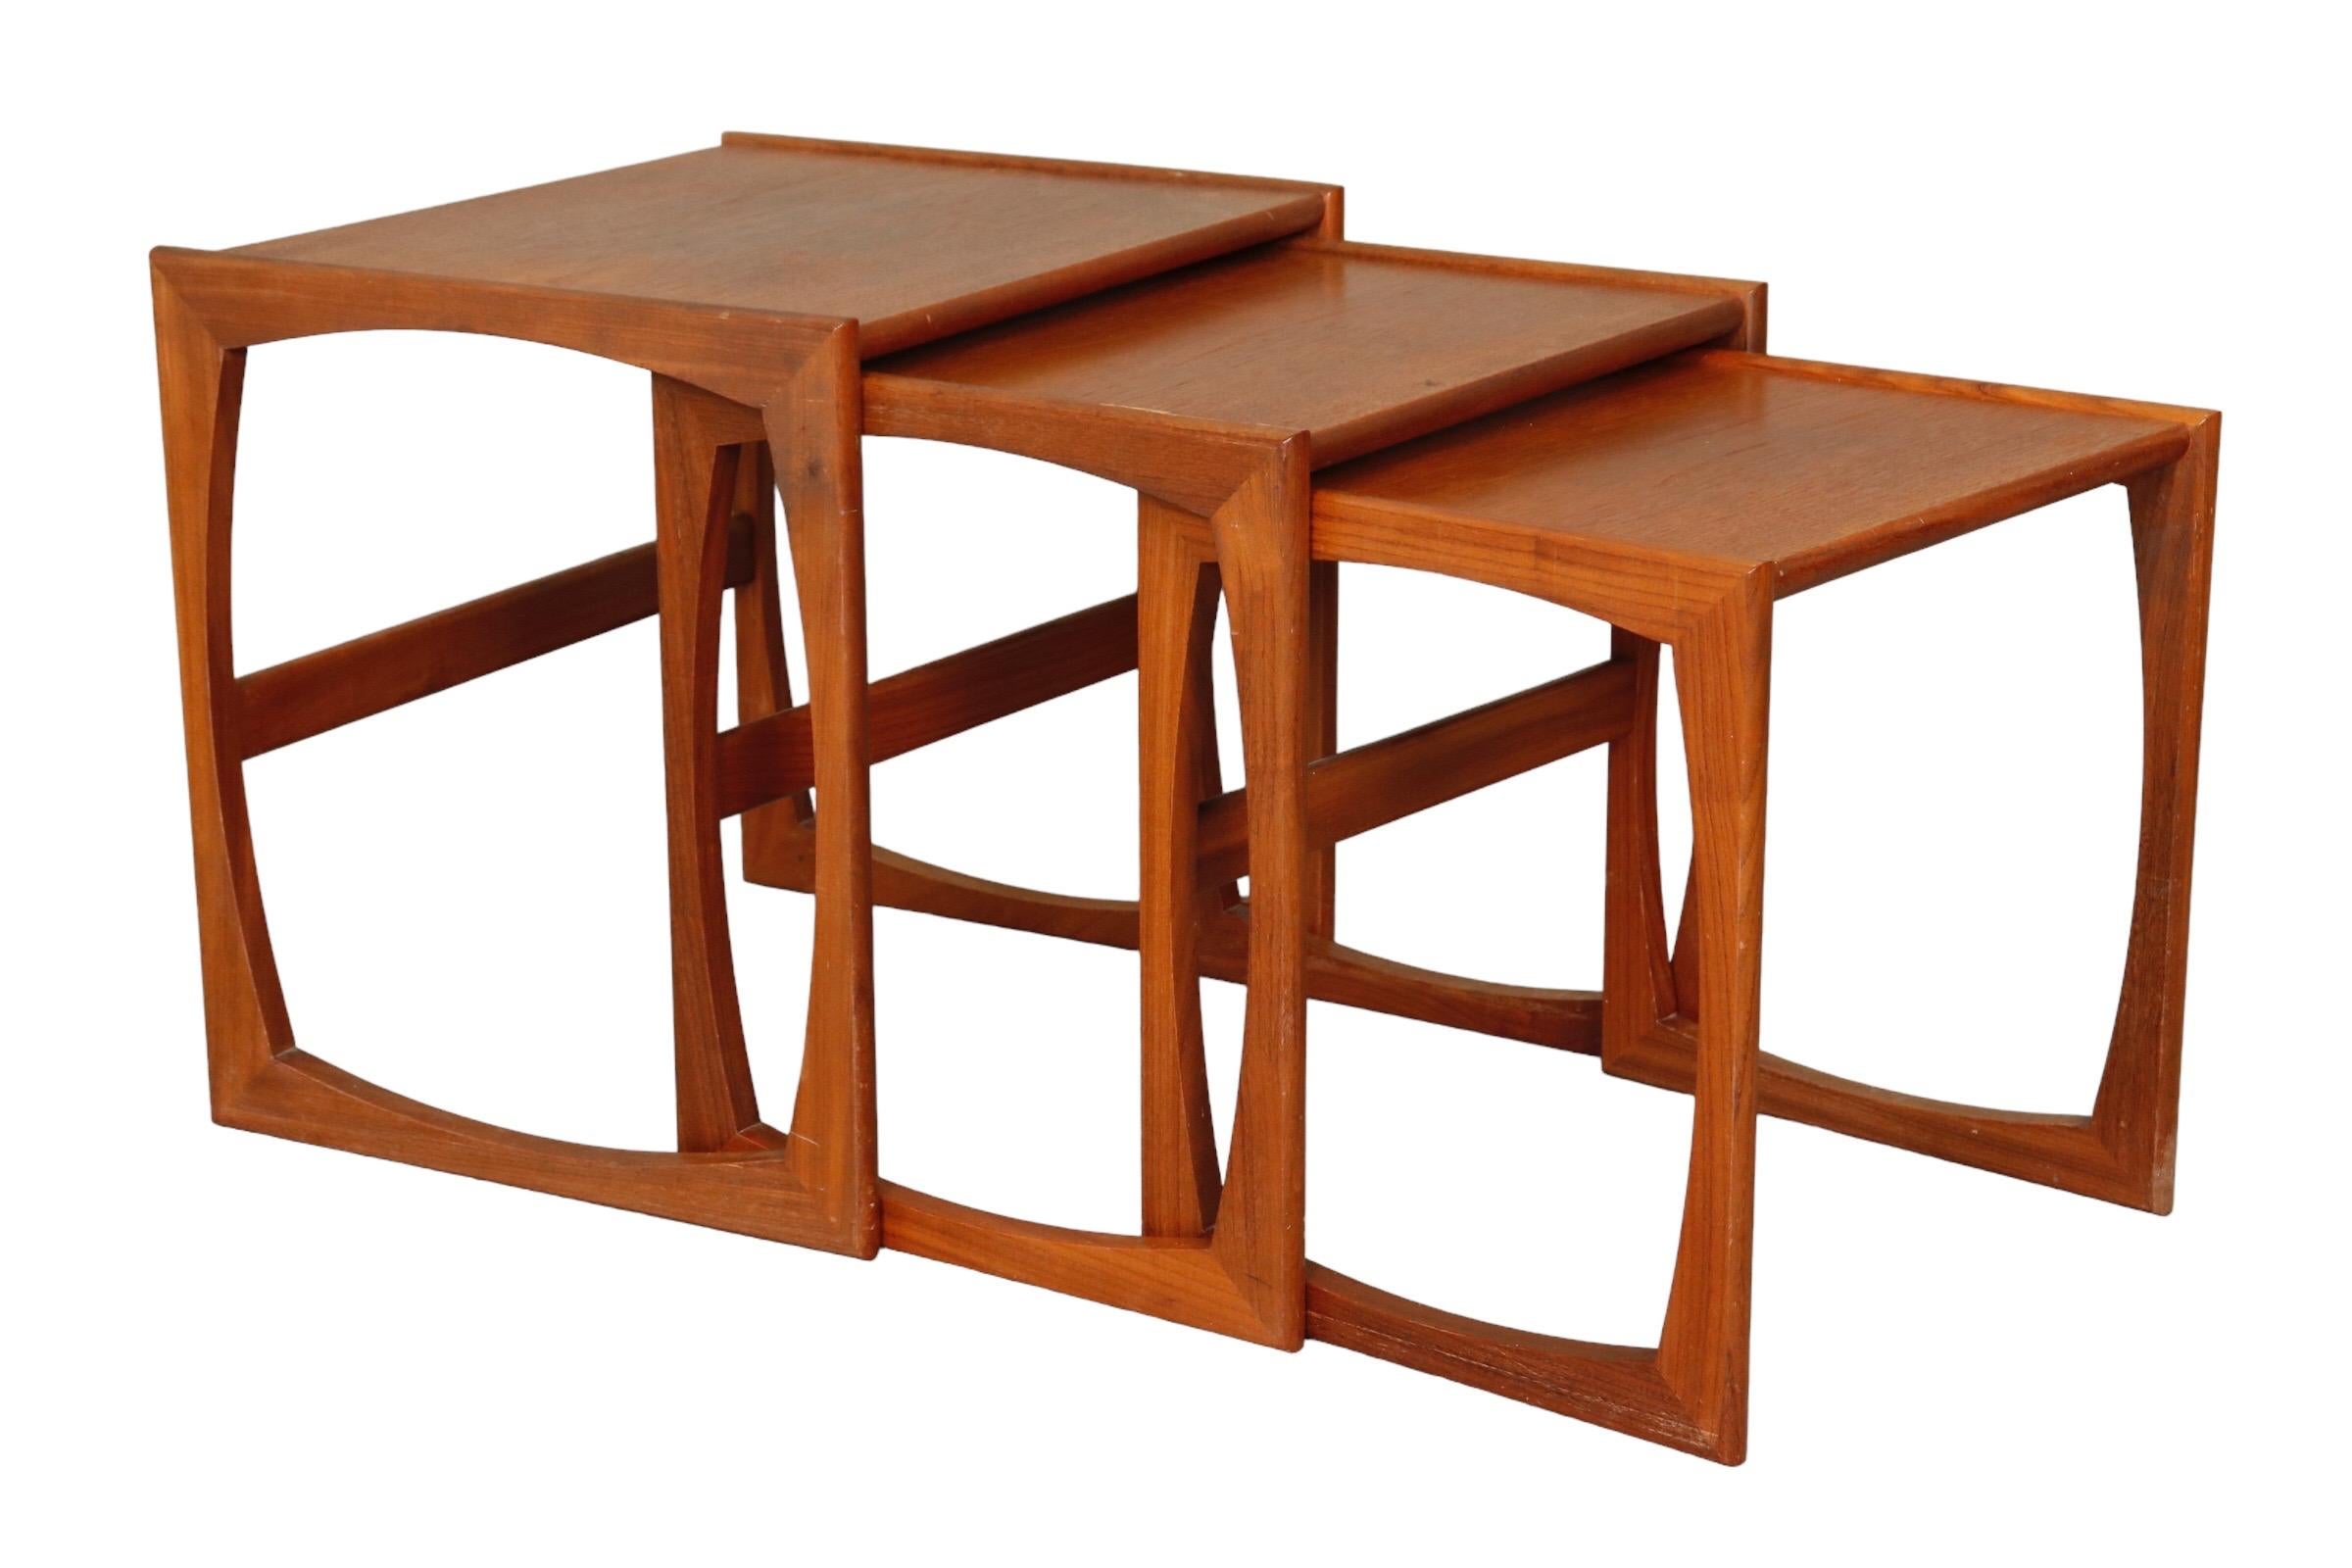 A set of three nesting tables designed by Robert Benett for G Plan. Cube shaped tables are made of teak.

The largest table measures 18.75”height x 17” wide x 21.25” deep.